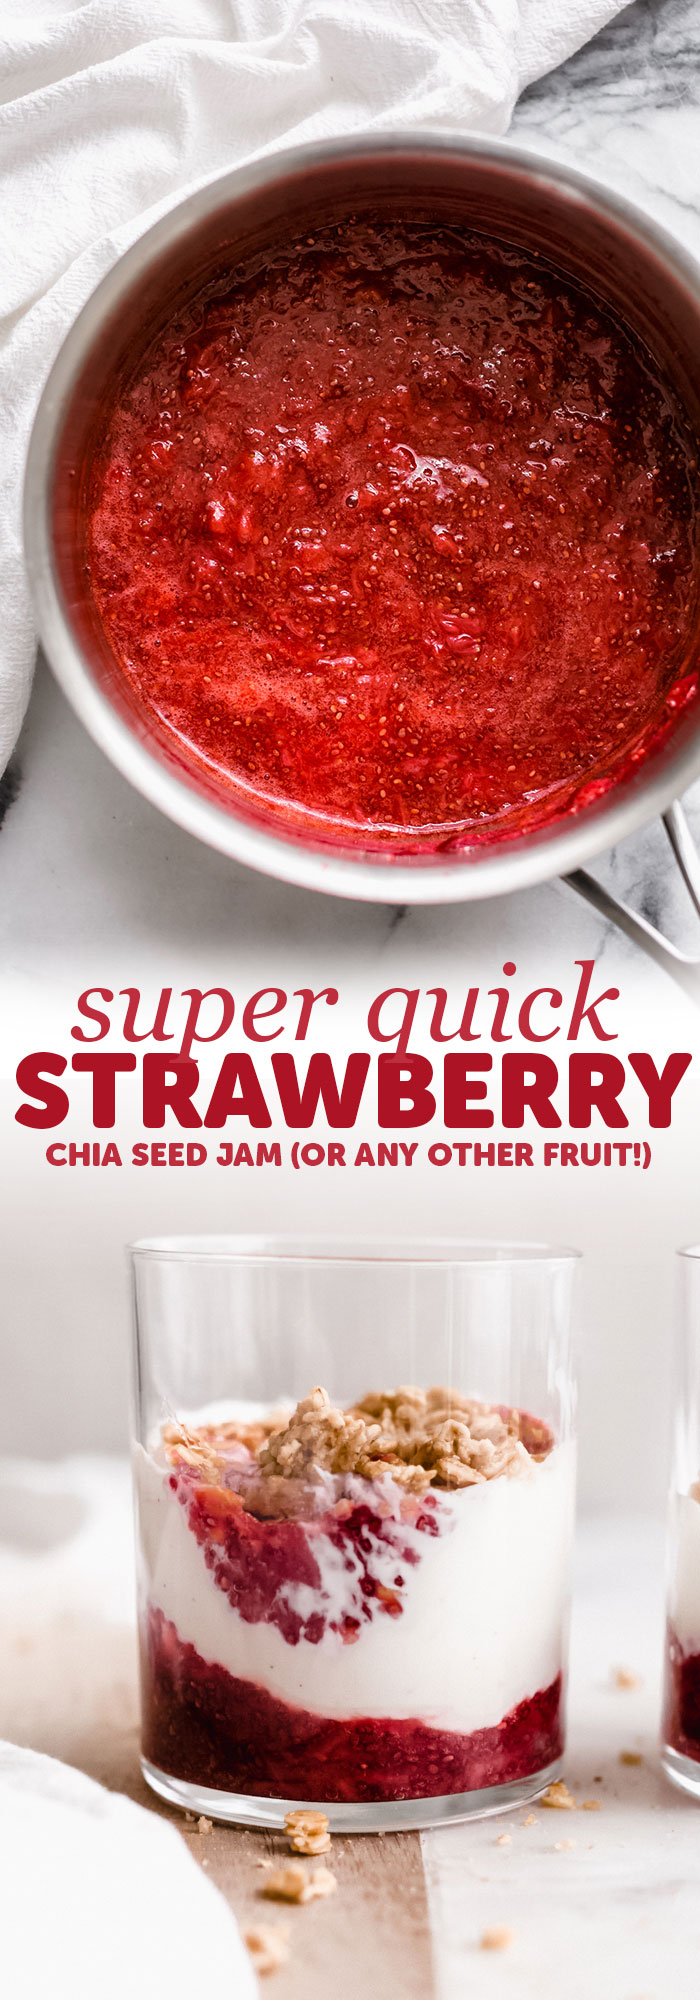 Super Quick Chia Seed Jam - Learn how to make homemade chia seed jam using all sorts of different fruit! This jam is much healthier than traditional jam and tastes great! #chiaseedjam #chiajaam #homemadejam #jamrecipe #chiaseedjamrecipe | Littlespicejar.com